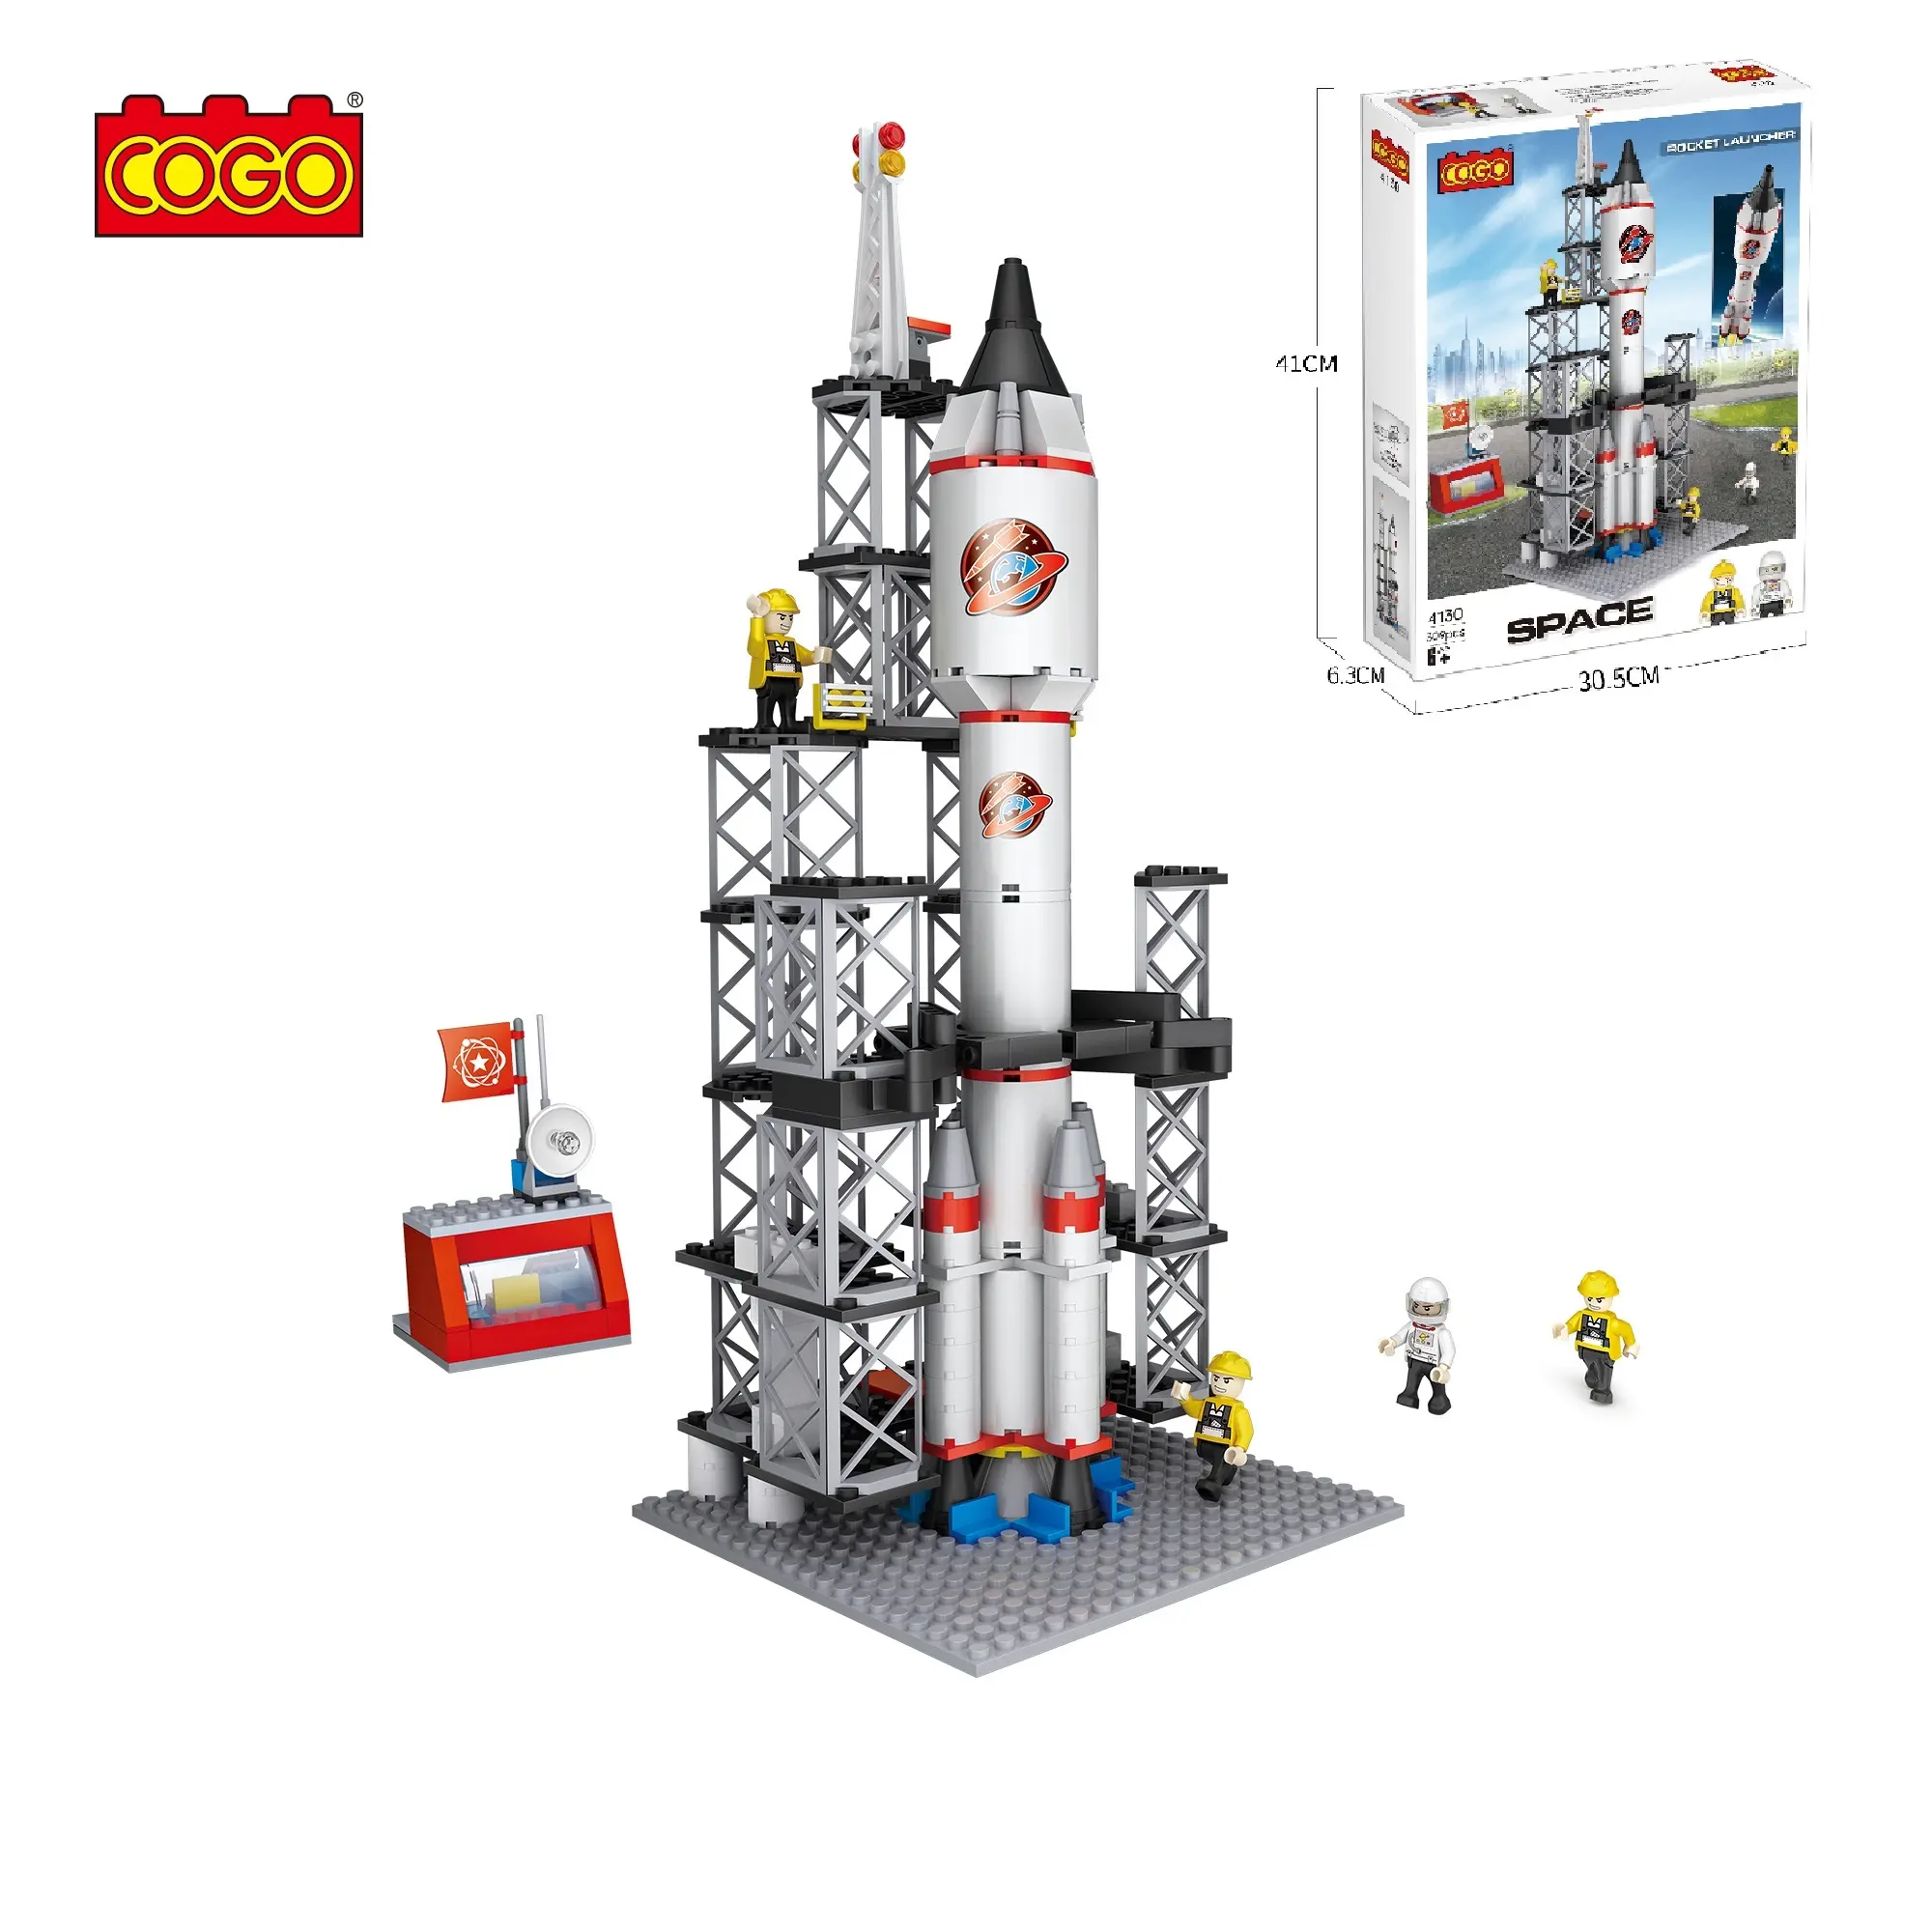 COGO 309 PCS City Series Building Blocks NASA Rocket Space Set with 4 Figures All Leading Blocks Hot Toys for Kids